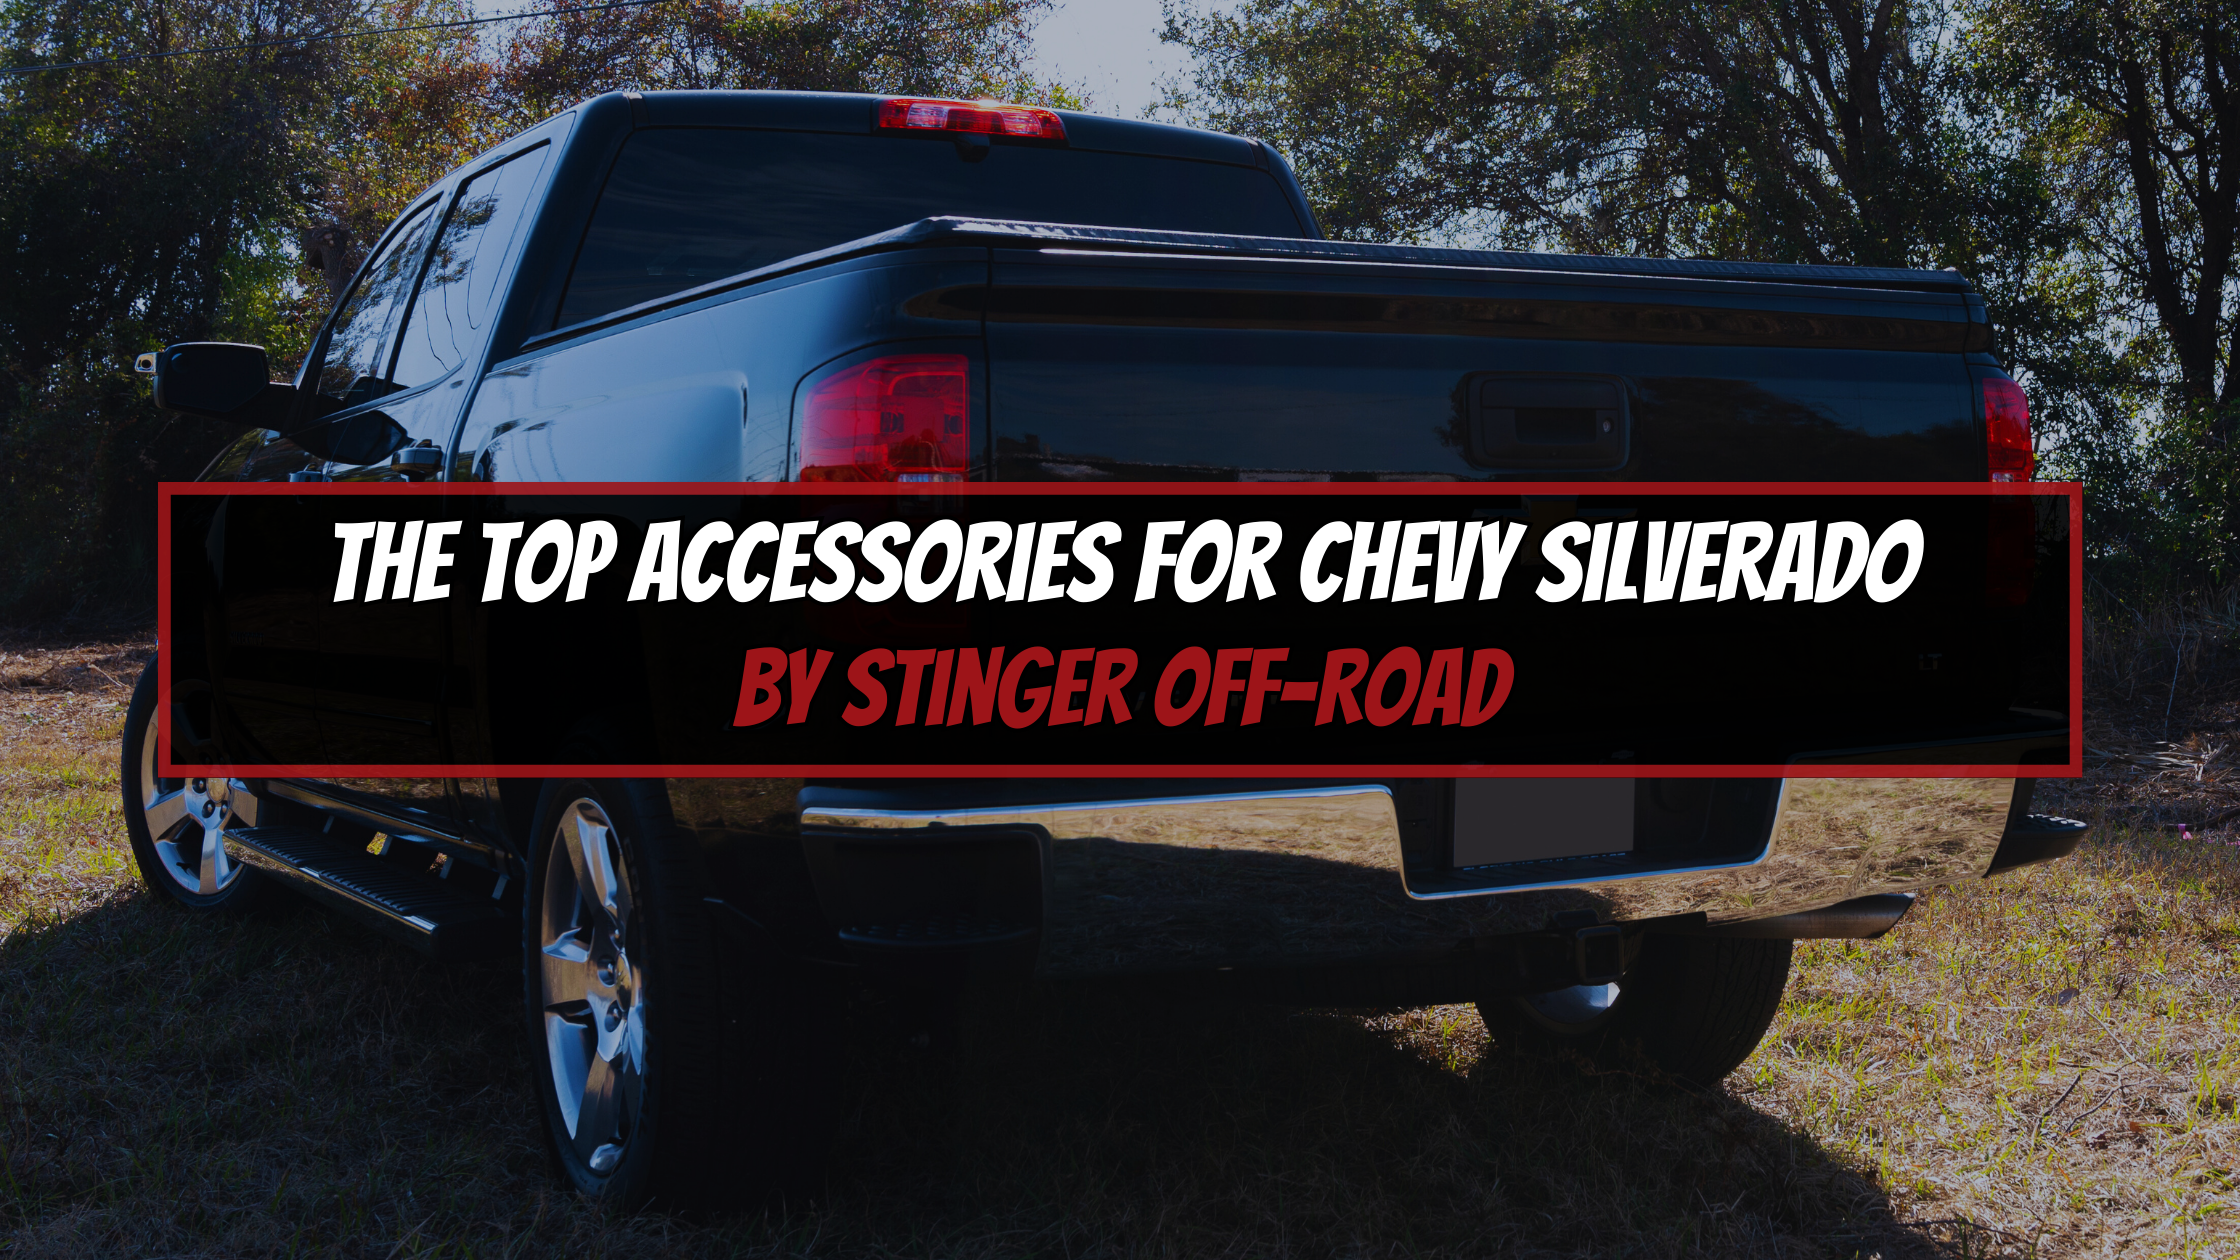 The Top Accessories for Chevy Silverado by Stinger Off-Road